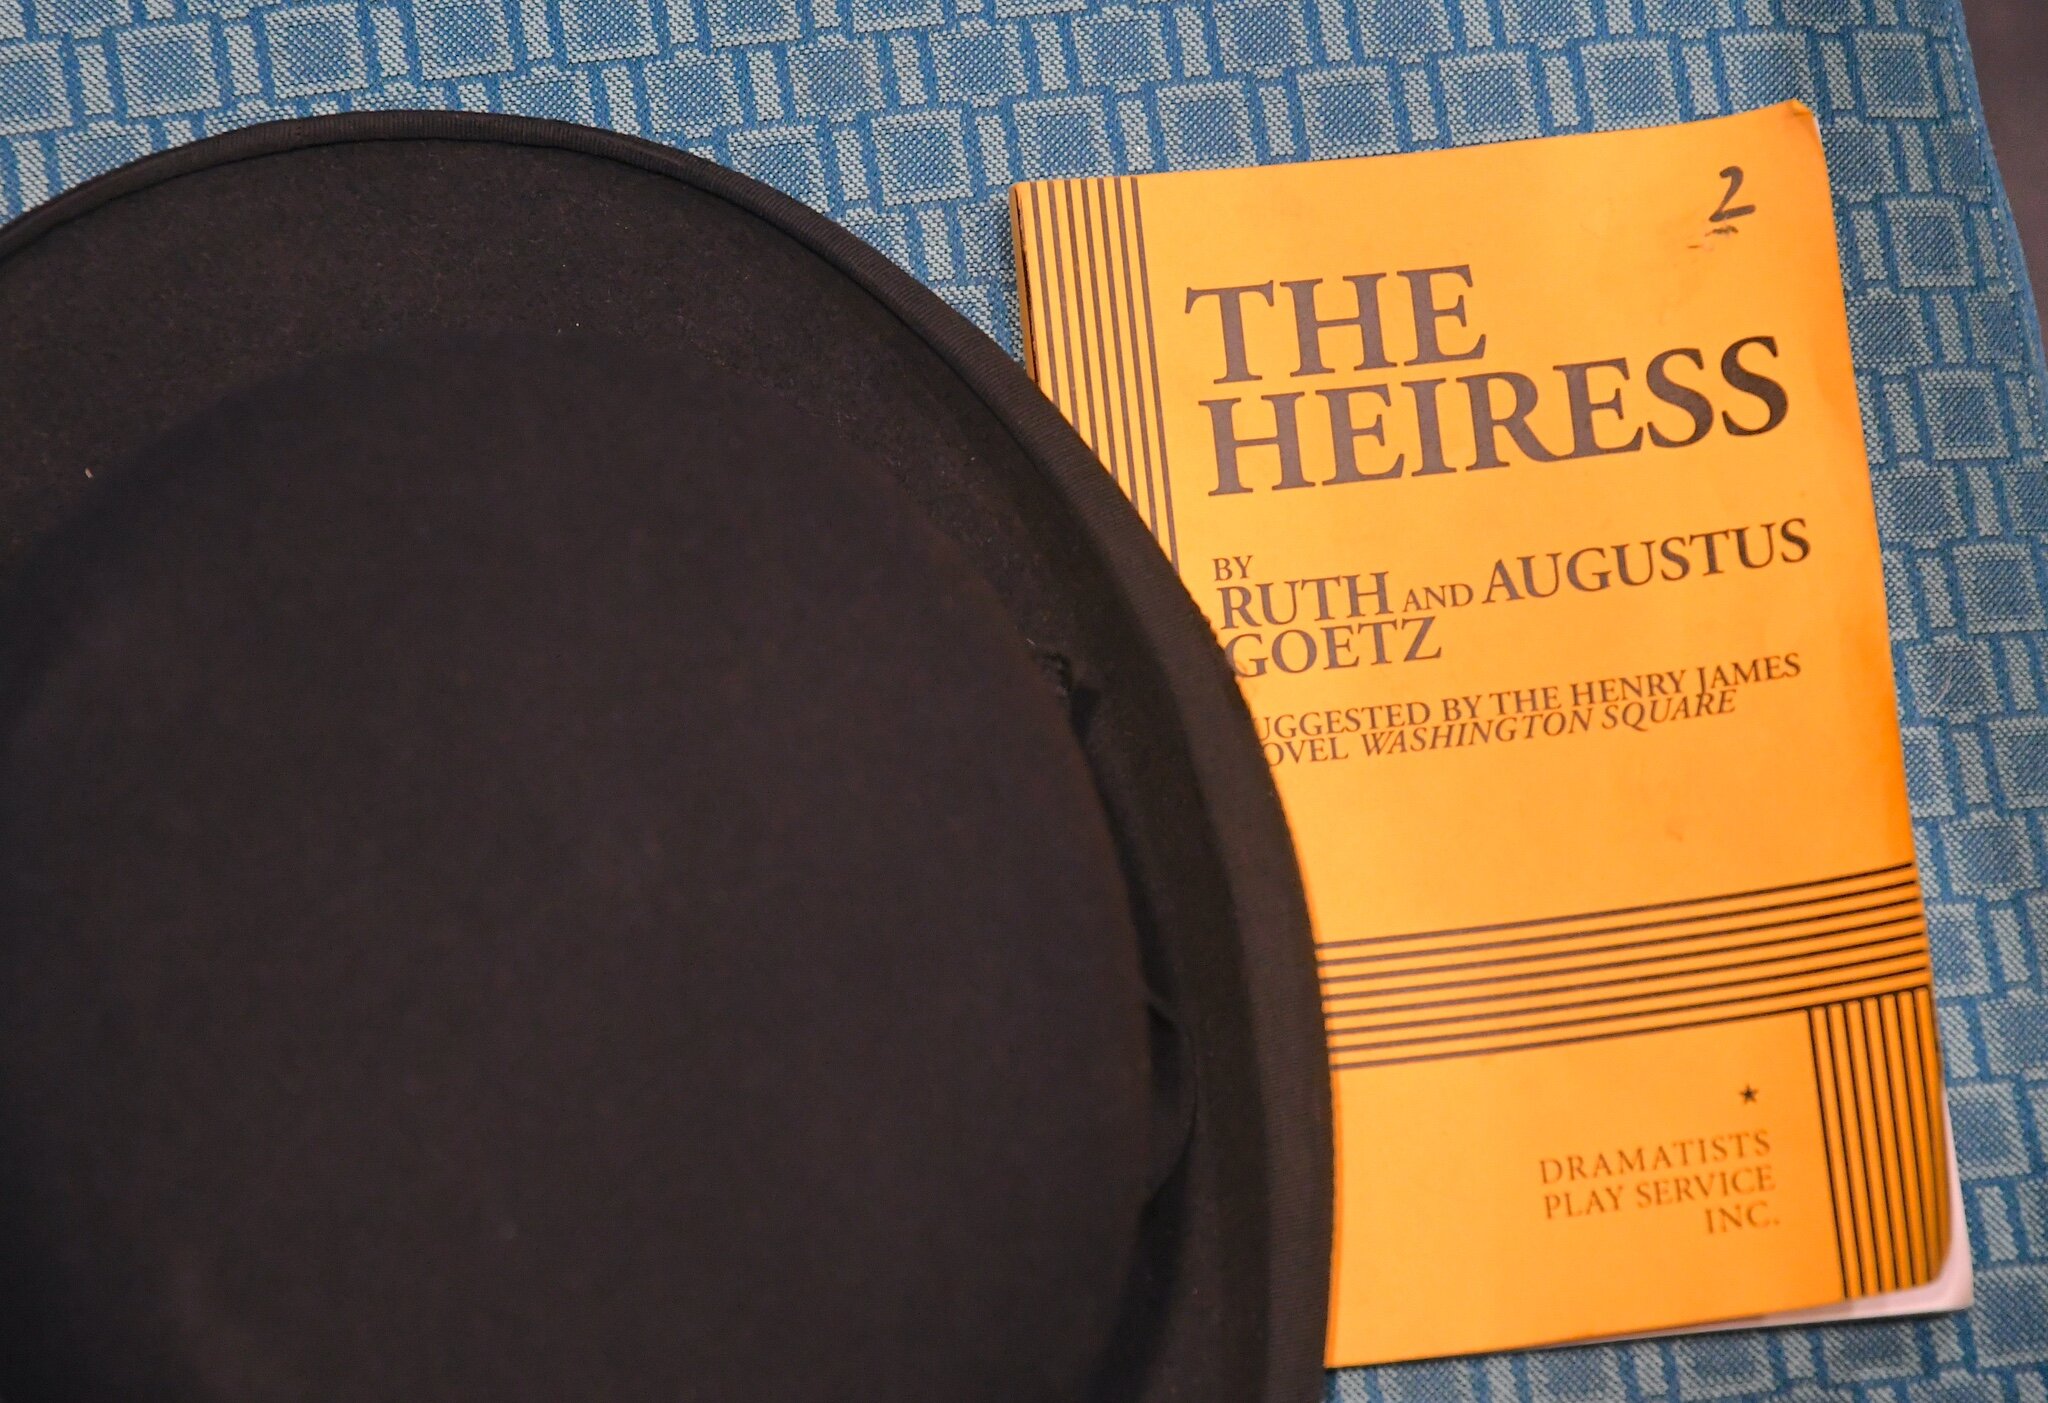 “The Heiress” is the next production of Marshall’s Great Escape Stage Company.